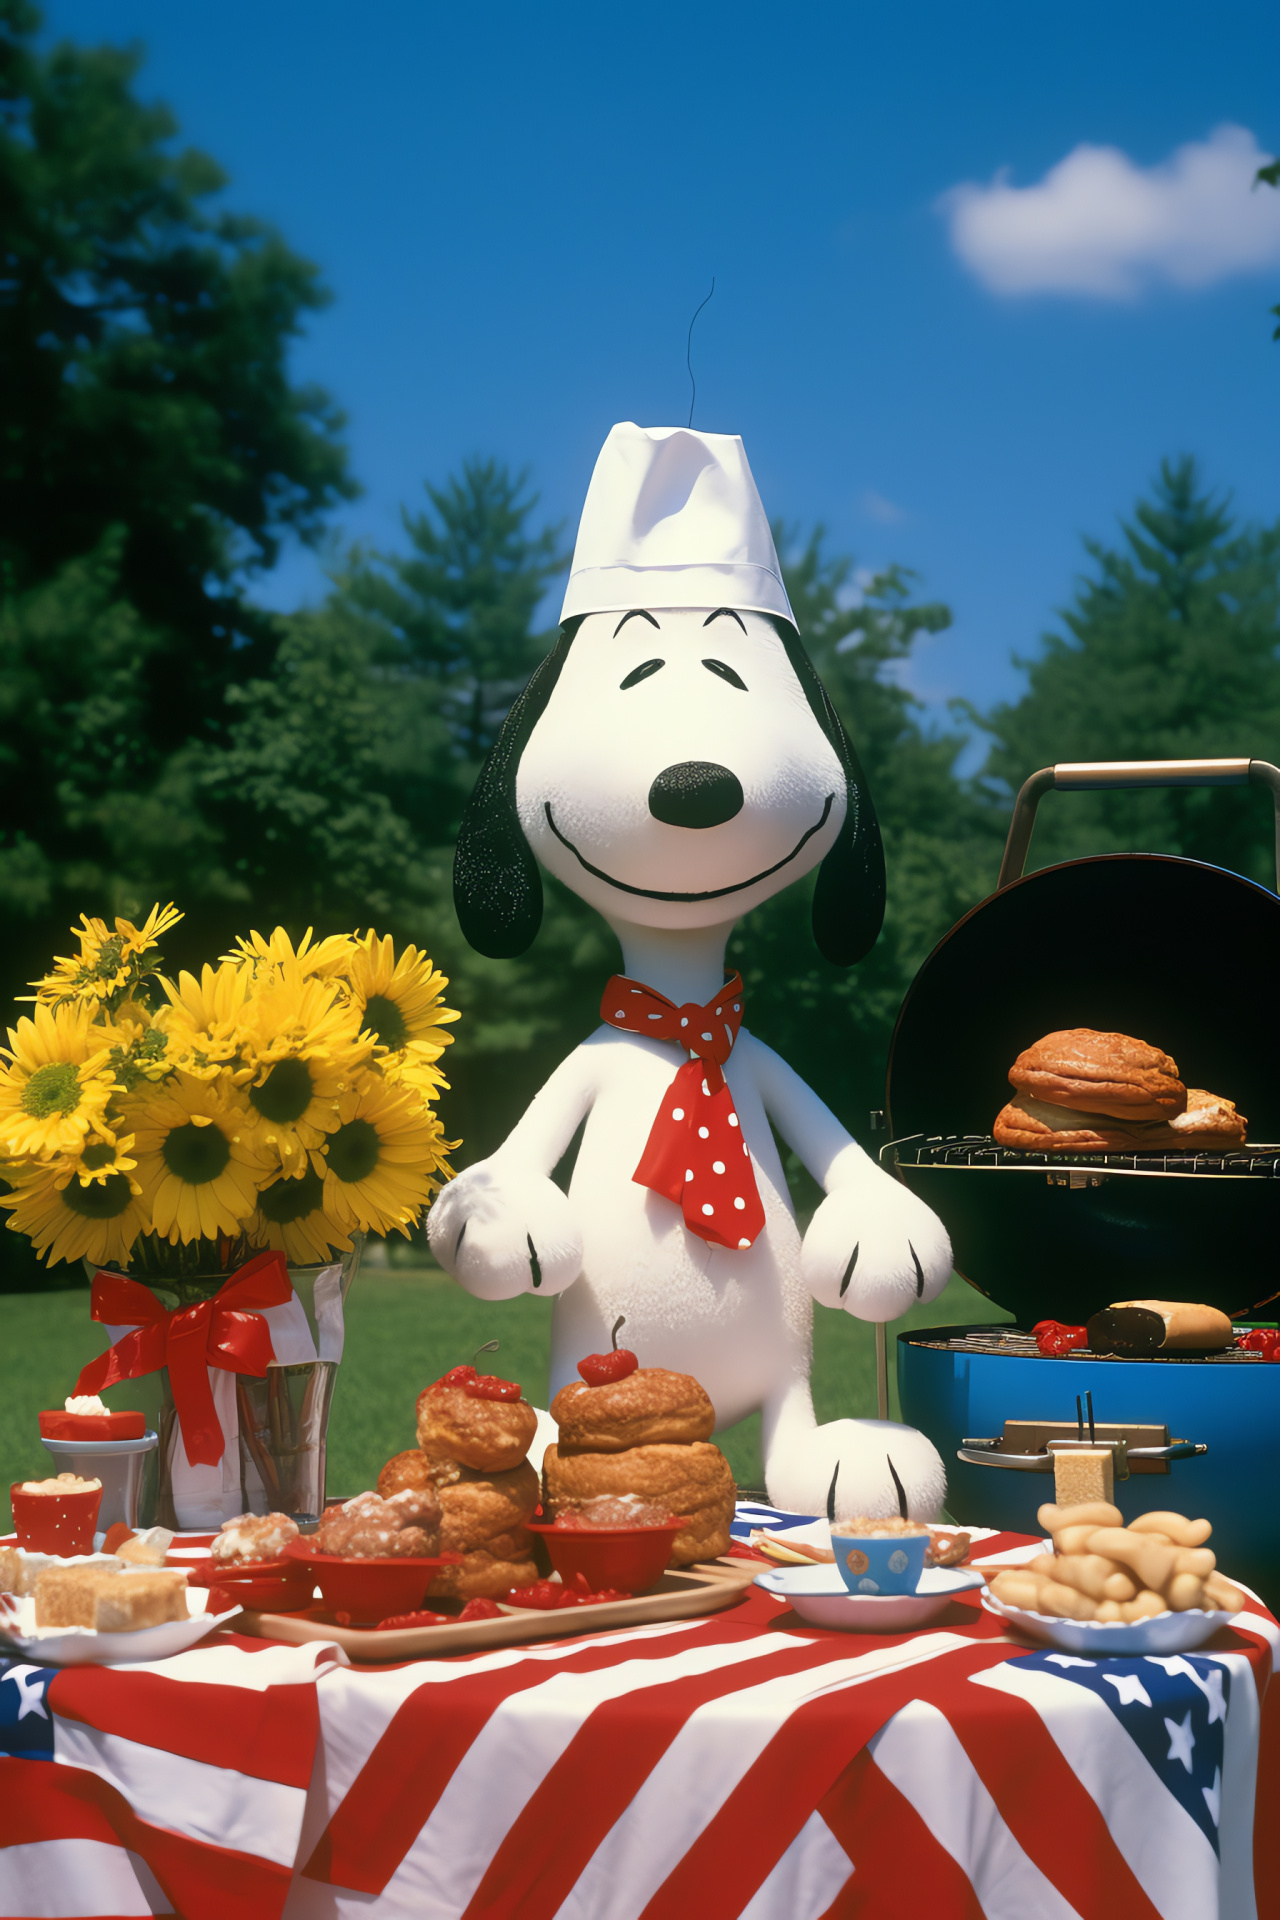 Snoopy summer barbecue, Woodstock July 4th, outdoor grill festivity, American backyard, summer patties, HD Phone Image